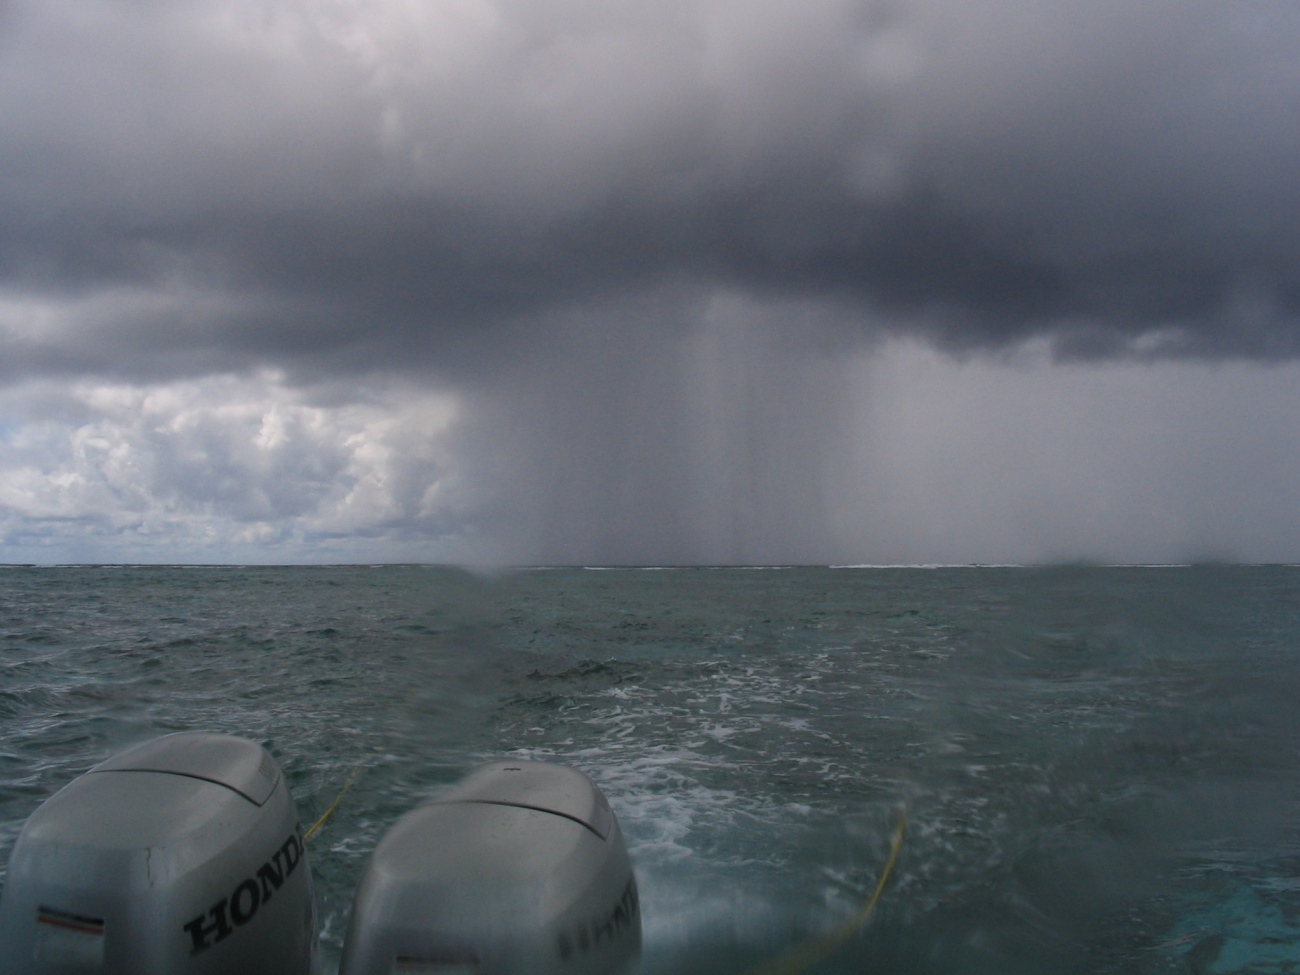 A squall seen from work boat during marine debris removal operations